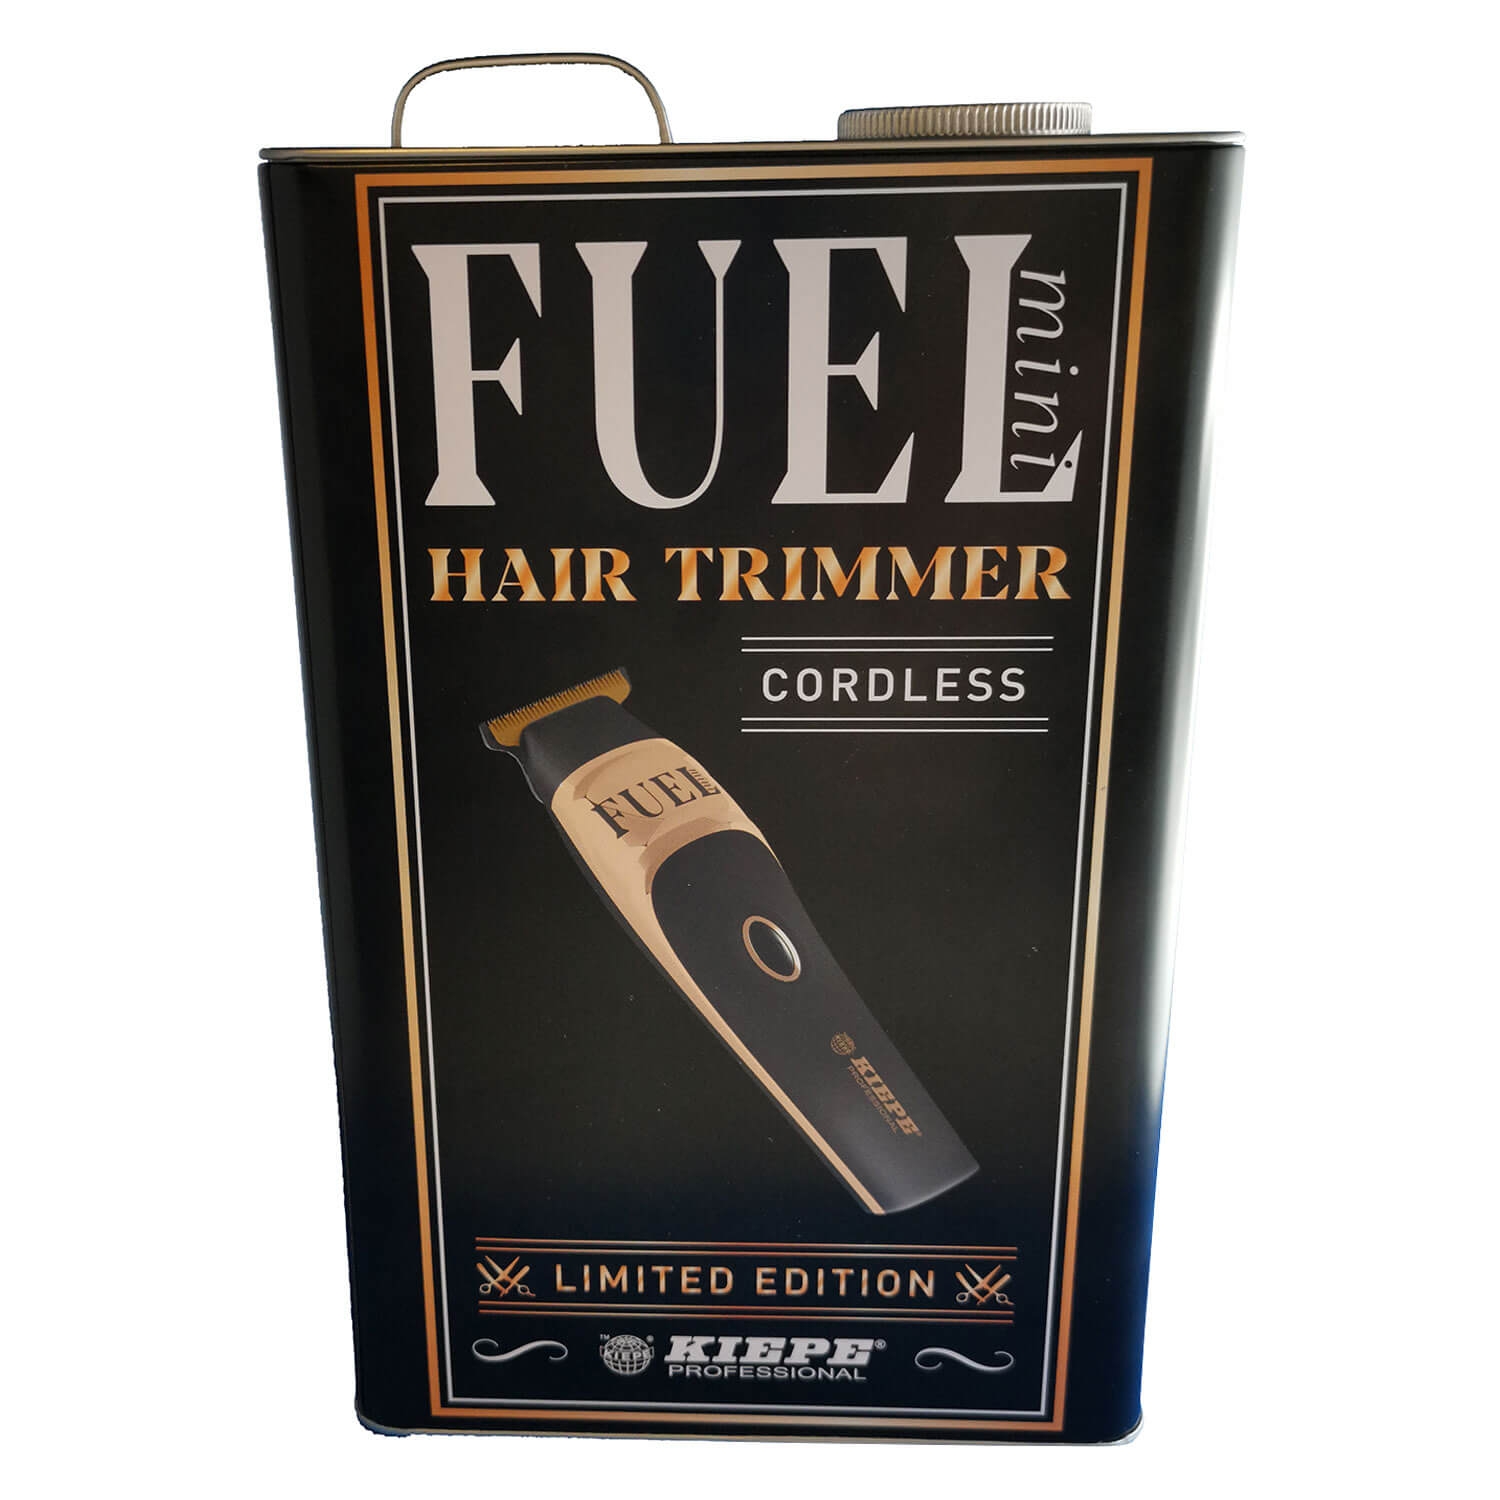 Product image from Kiepe - Fuel Mini Hair Trimmer